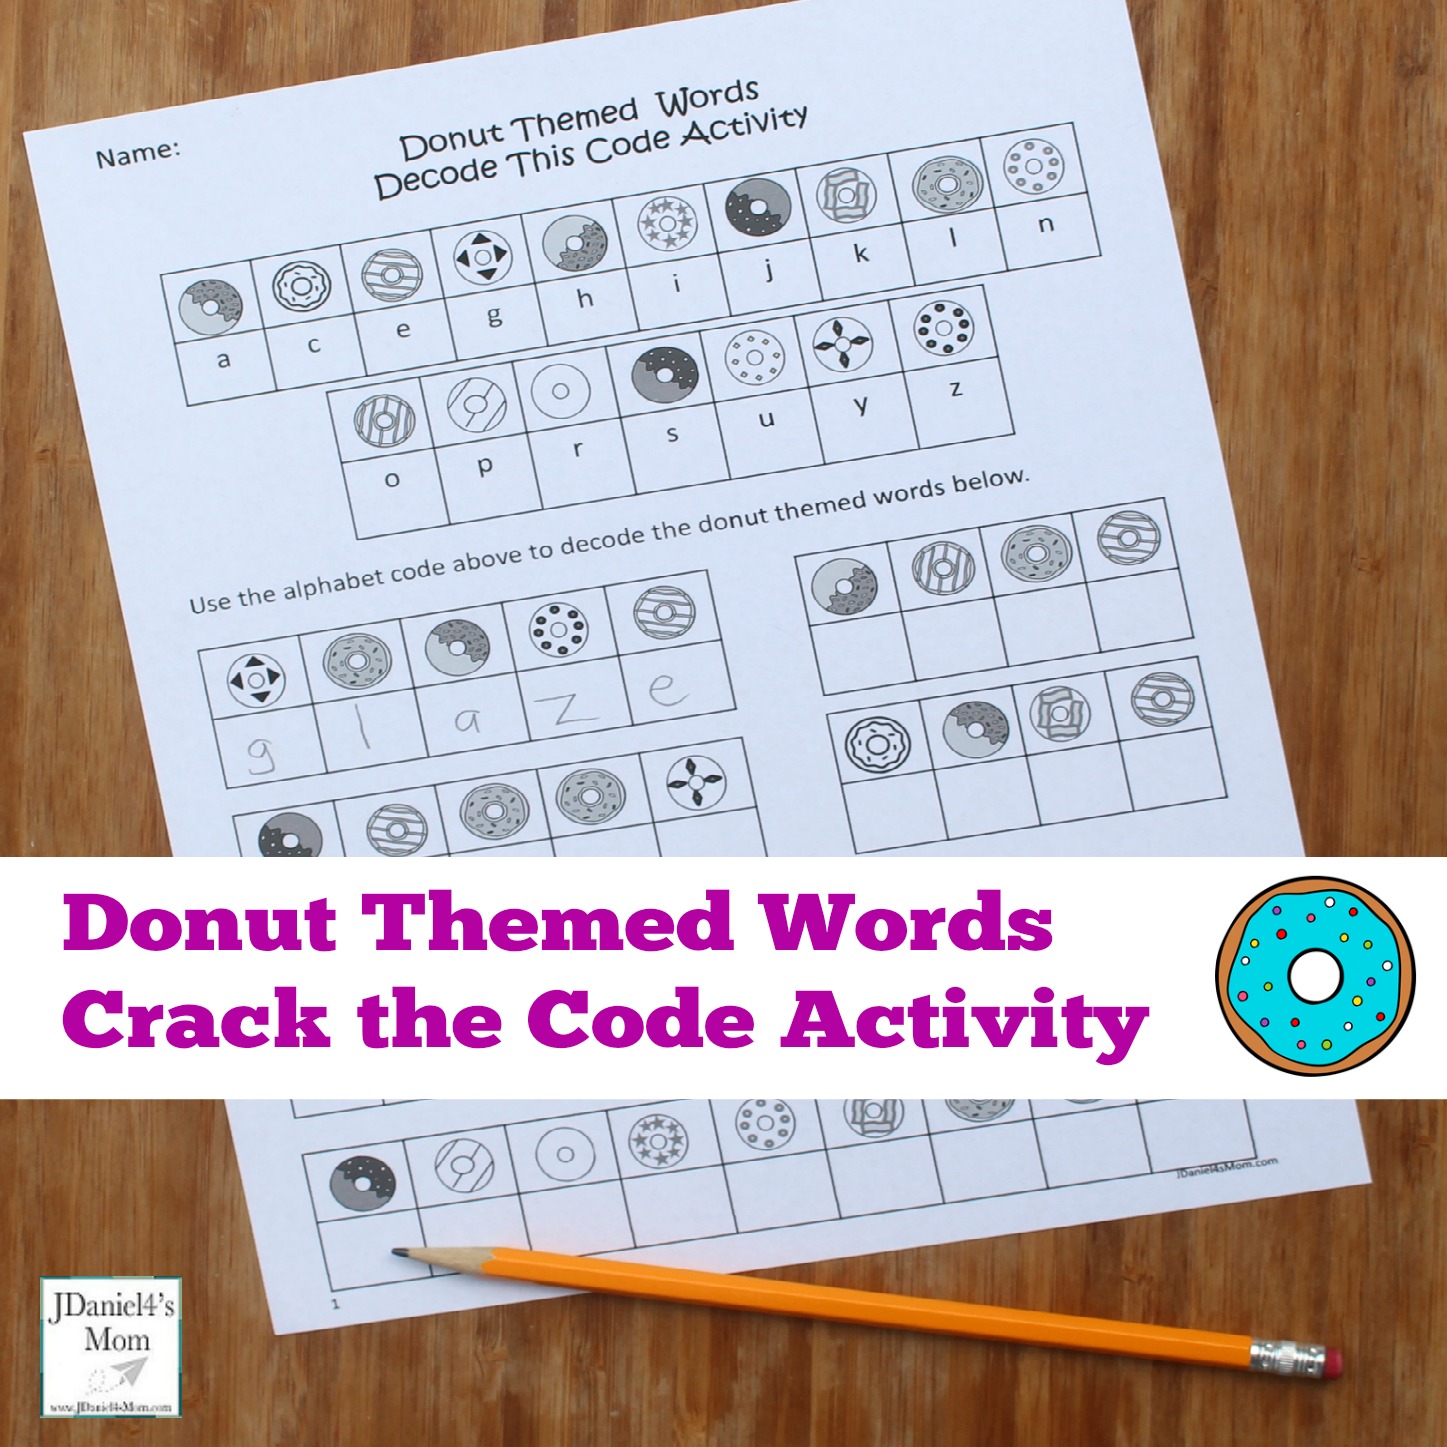 Donut Themed Words Crack the Code Activity- This is a fun way to work on code breaking. It would be great to explore on National Donut Day.